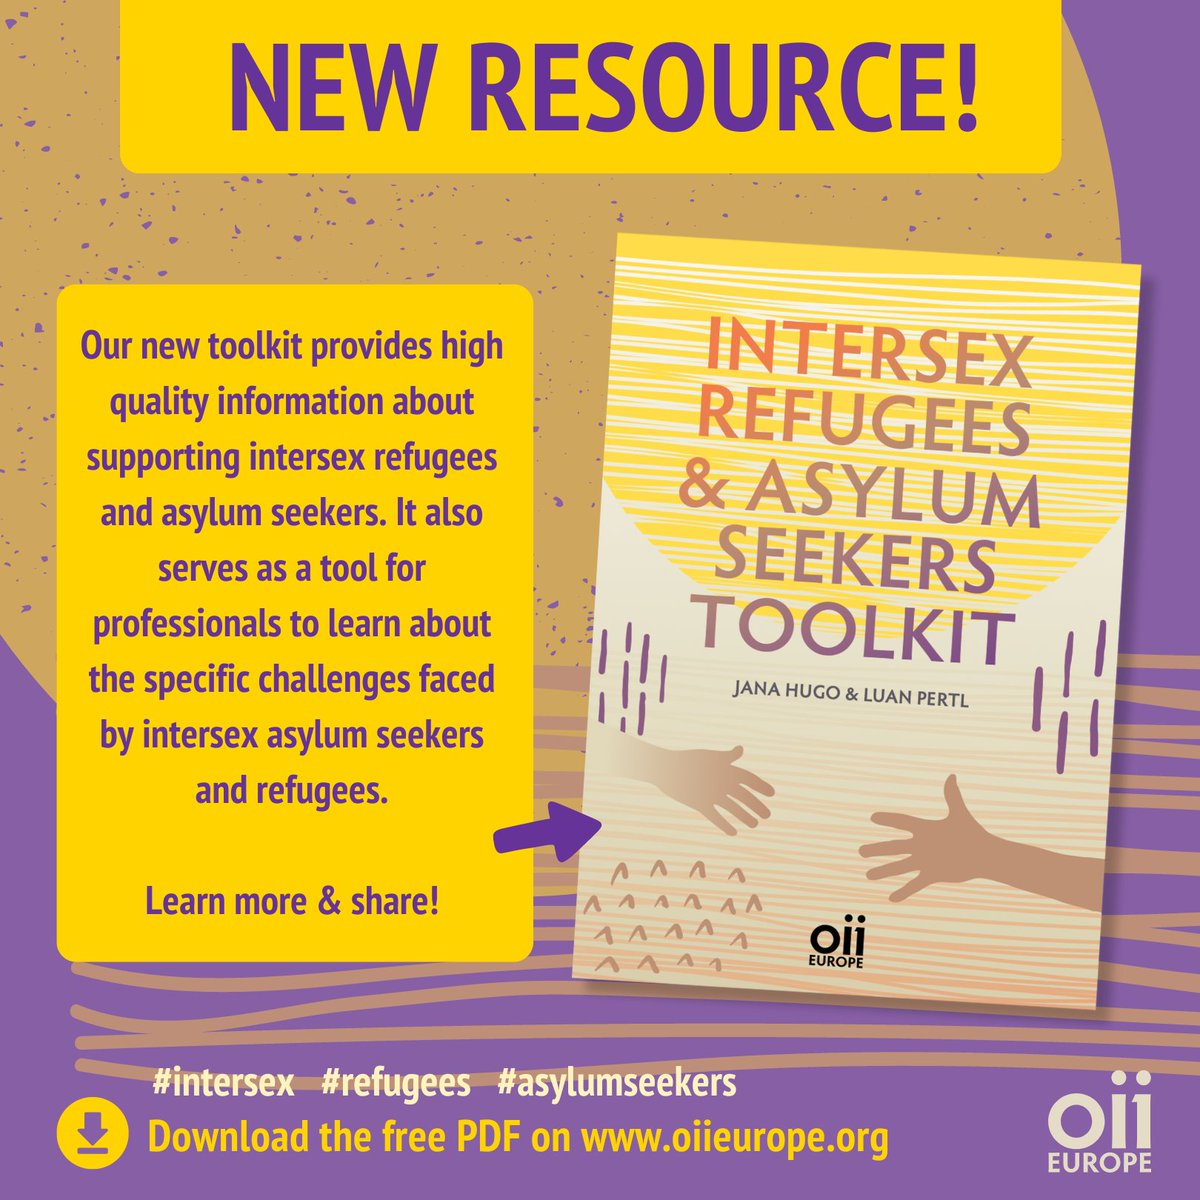 We are happy to present our new resource! The OII Europe Refugees & Asylum Seekers toolkit provides high quality information for professionals supporting intersex refugees and asylum seekers. Learn more & share! bit.ly/OIIEUrastk #intersex #refugees #asylumseekers